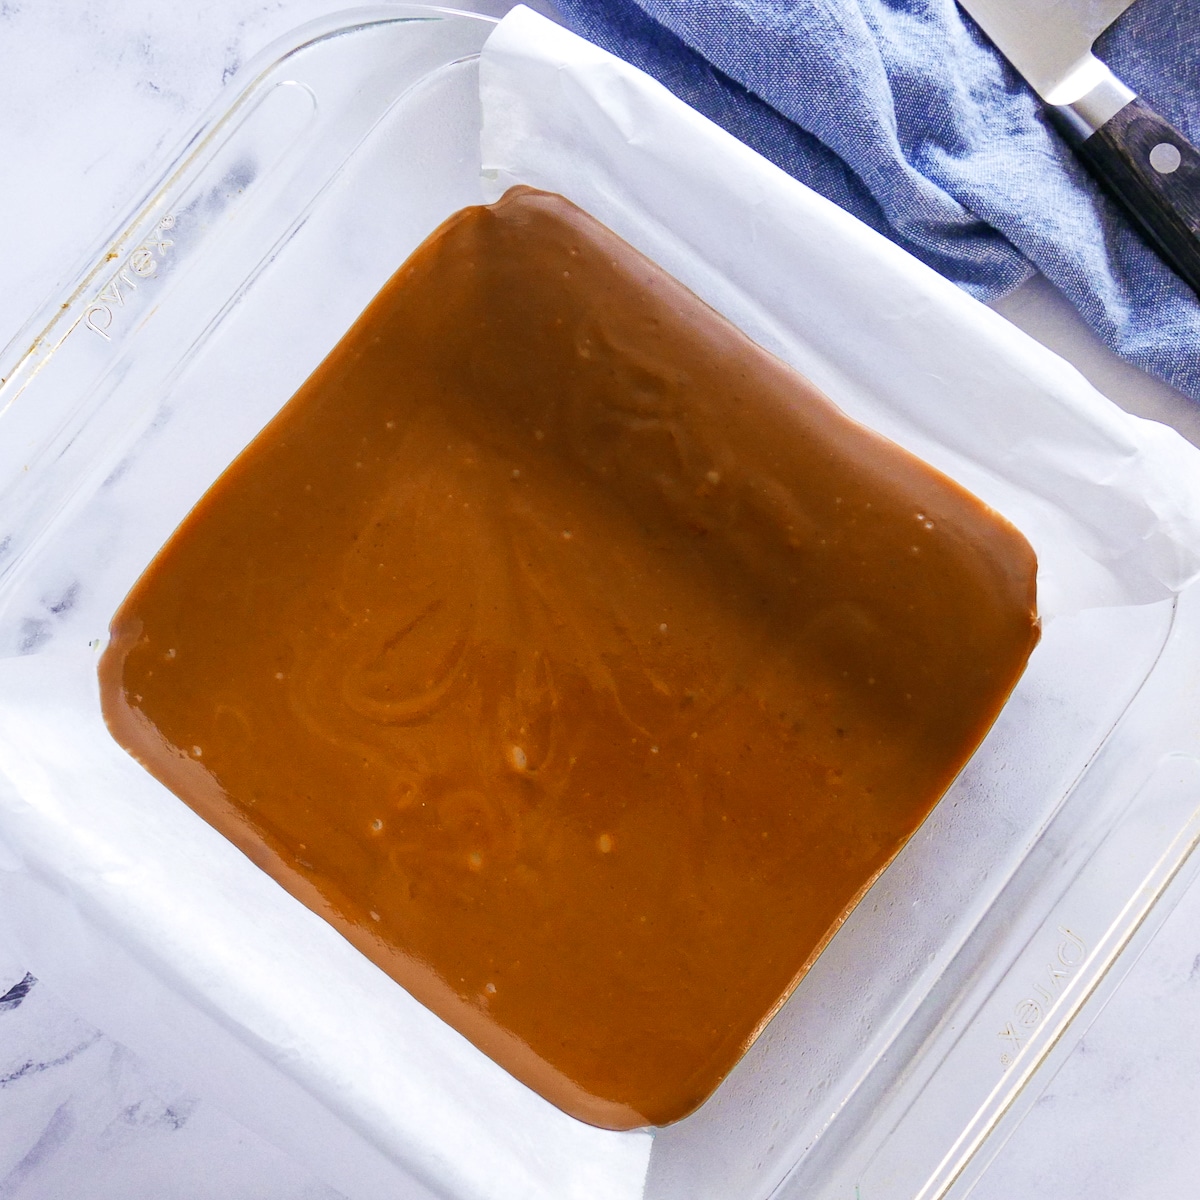 salted caramel poured into prepared baking dish.